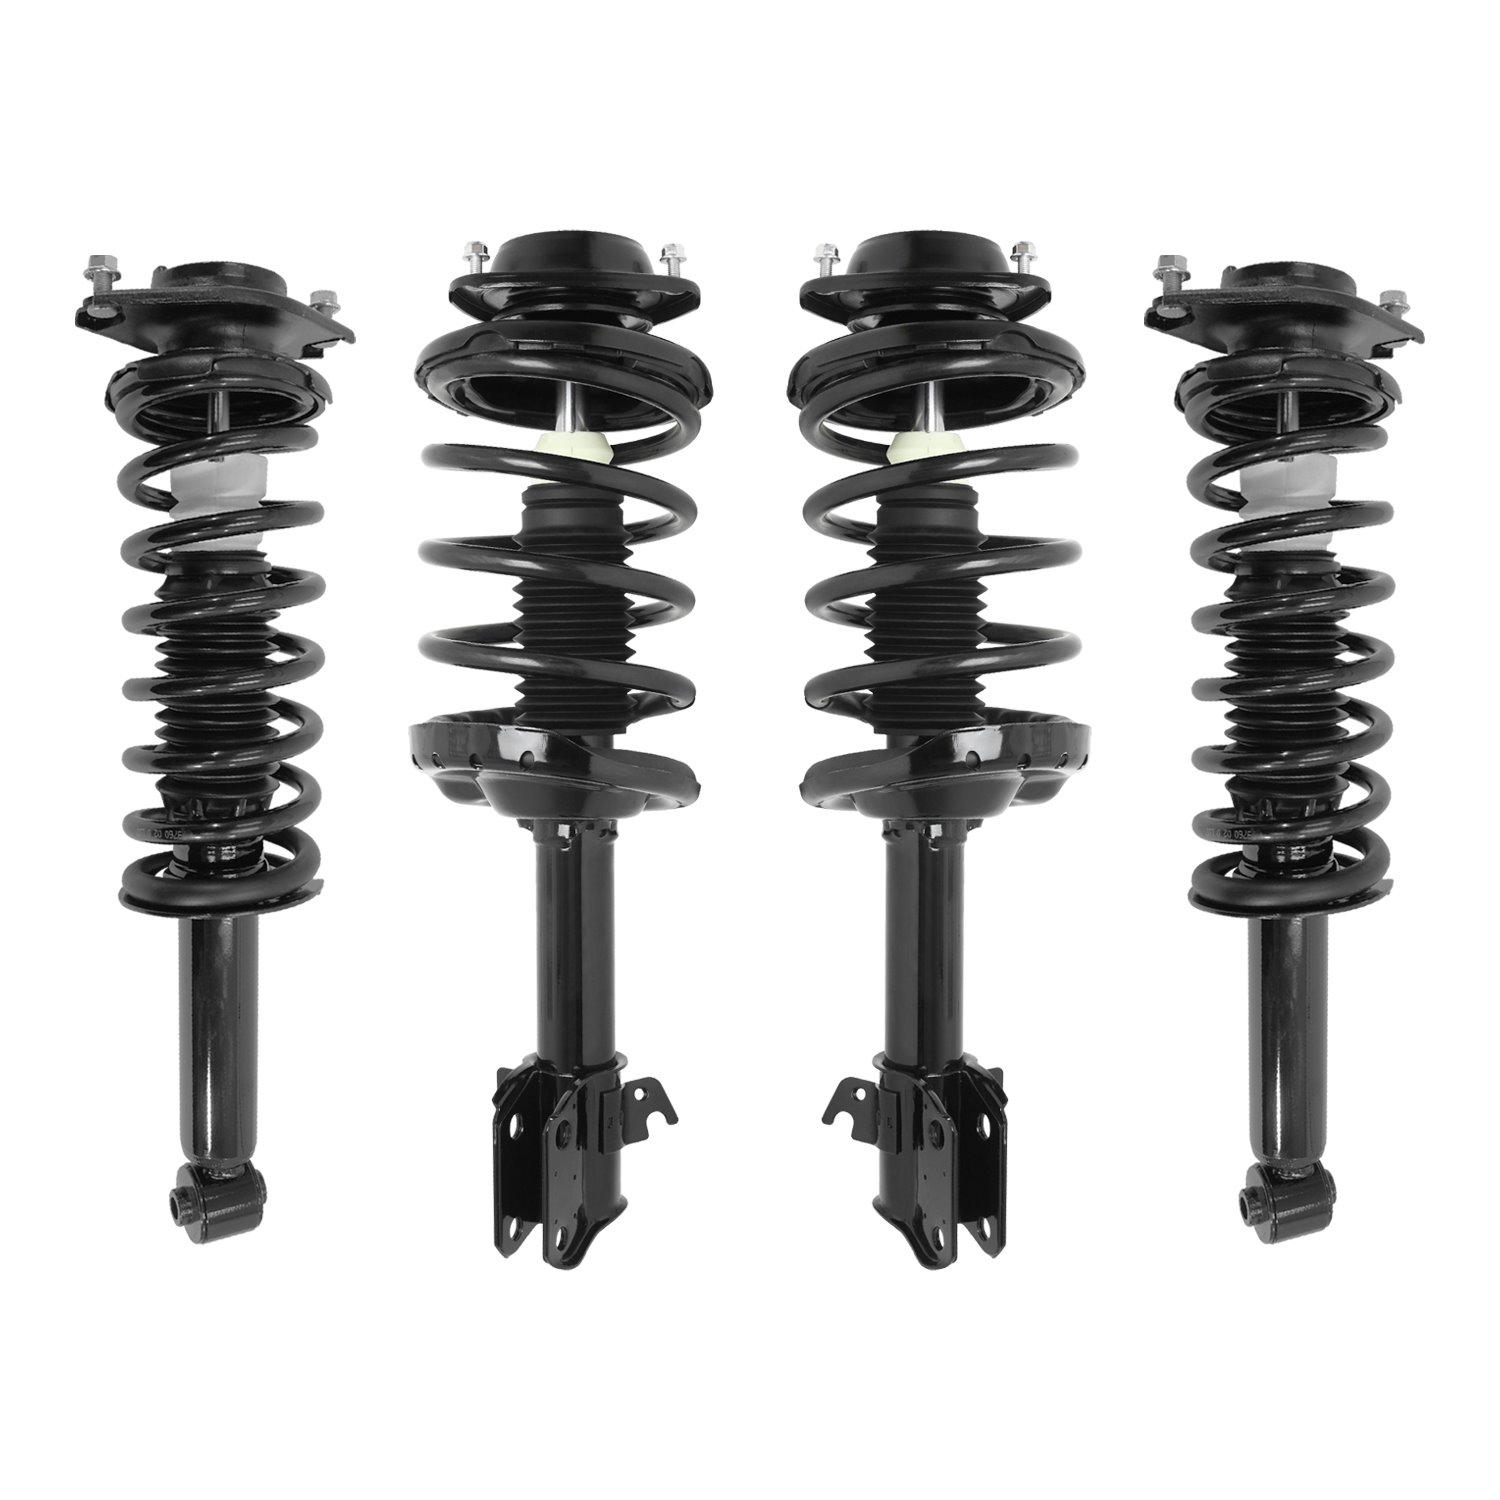 4-11911-15900-001 Front & Rear Suspension Strut & Coil Spring Assembly Kit Fits Select Subaru Outback